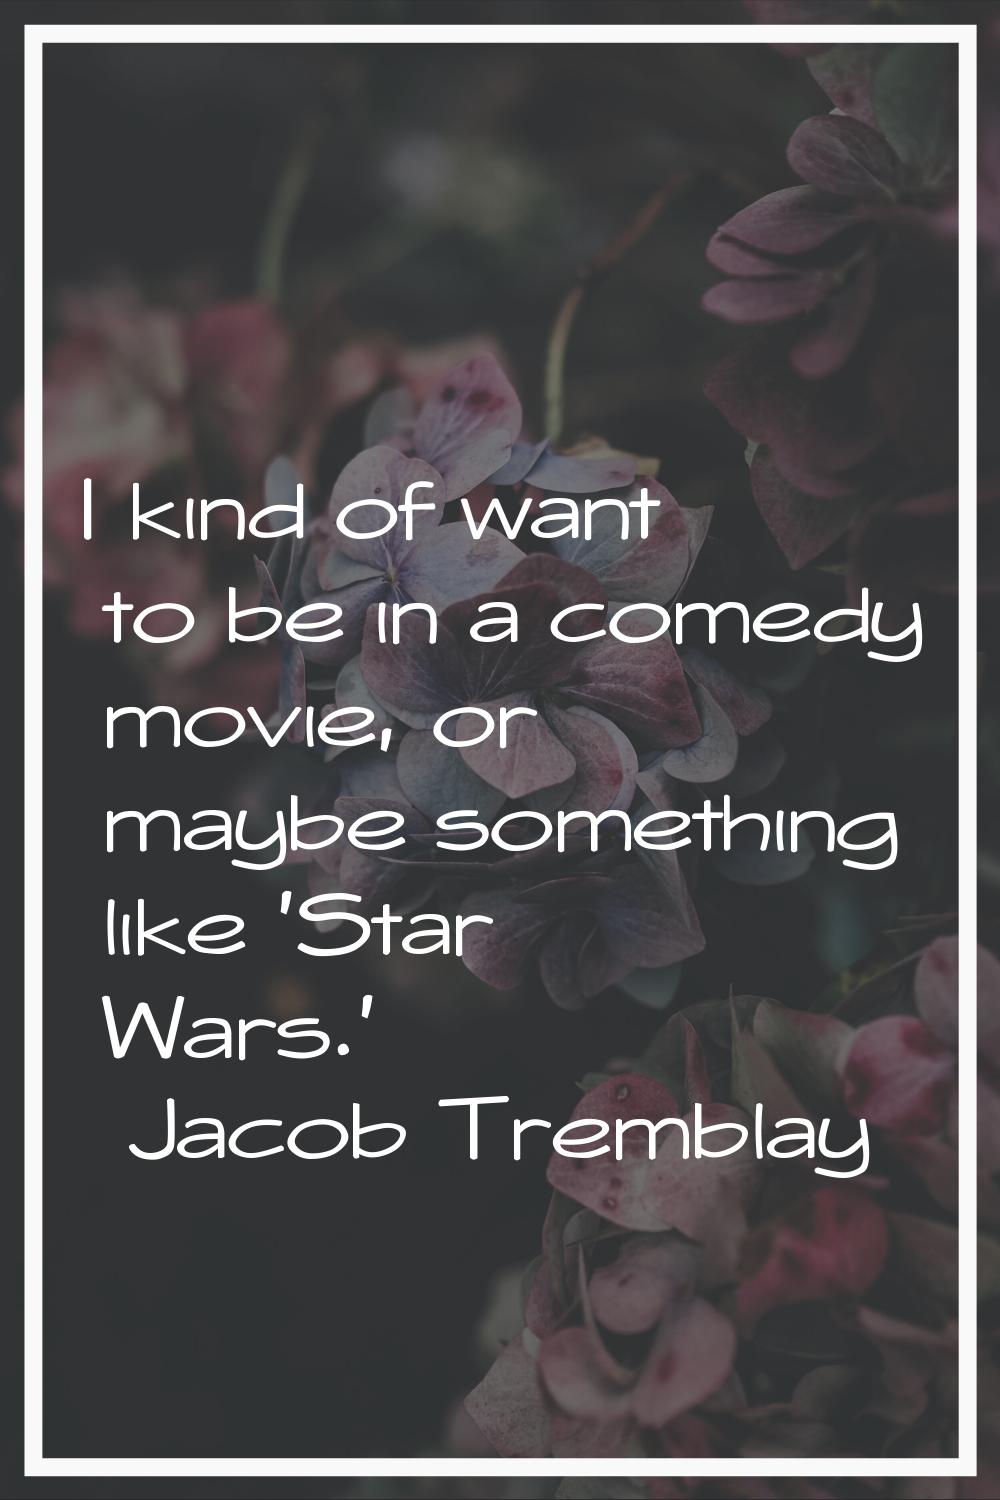 I kind of want to be in a comedy movie, or maybe something like 'Star Wars.'